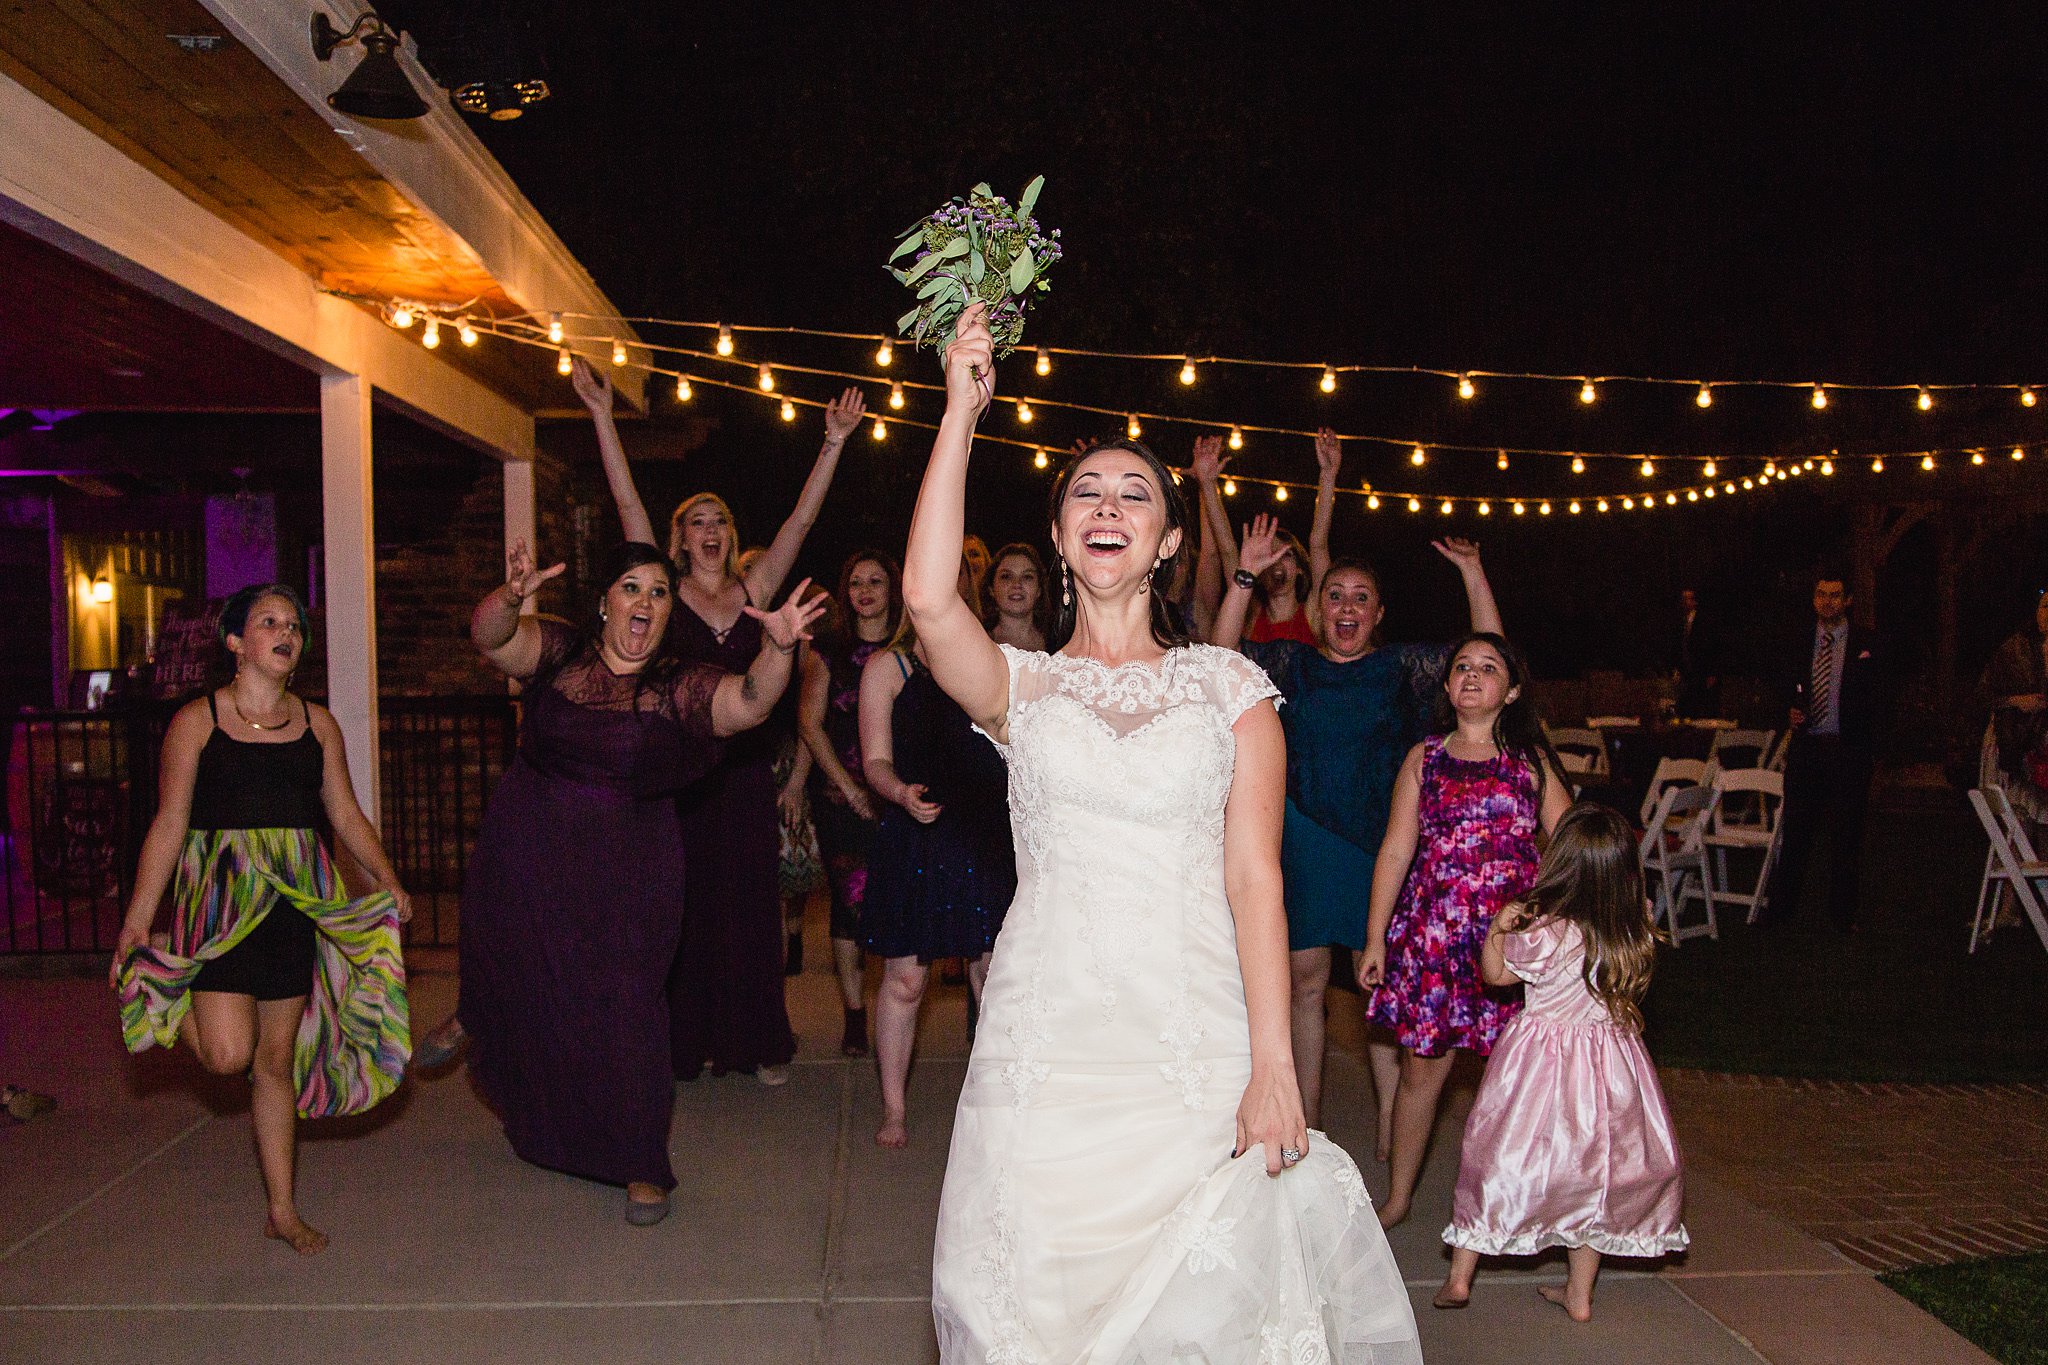 Bride tossing the bouquet to guests by Arizona wedding photographer PMA Photography.